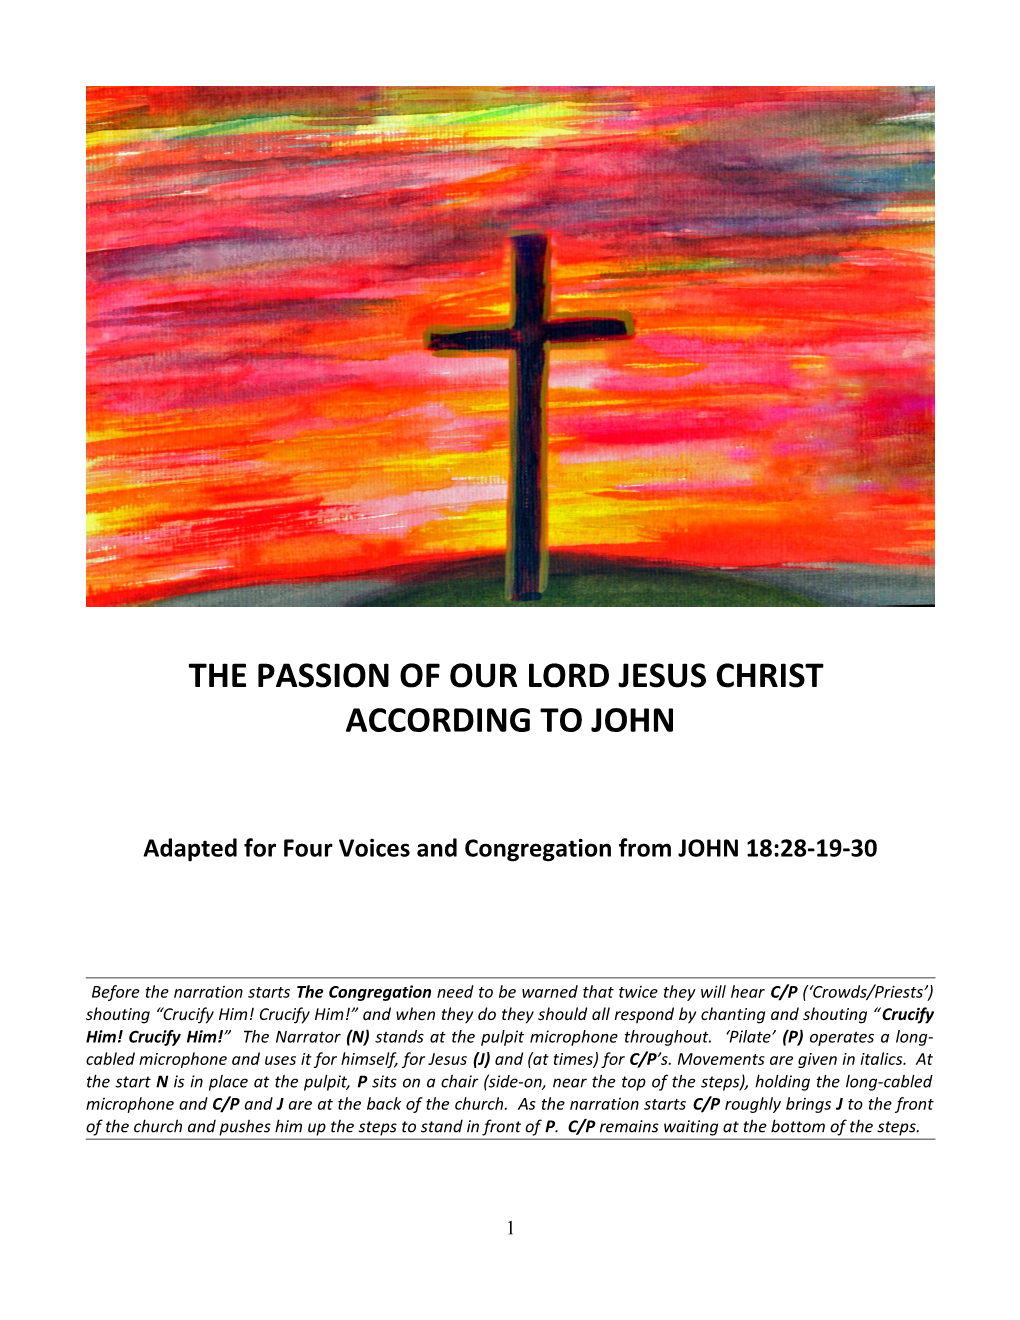 The Passion of Our Lord Jesus Christ According to John